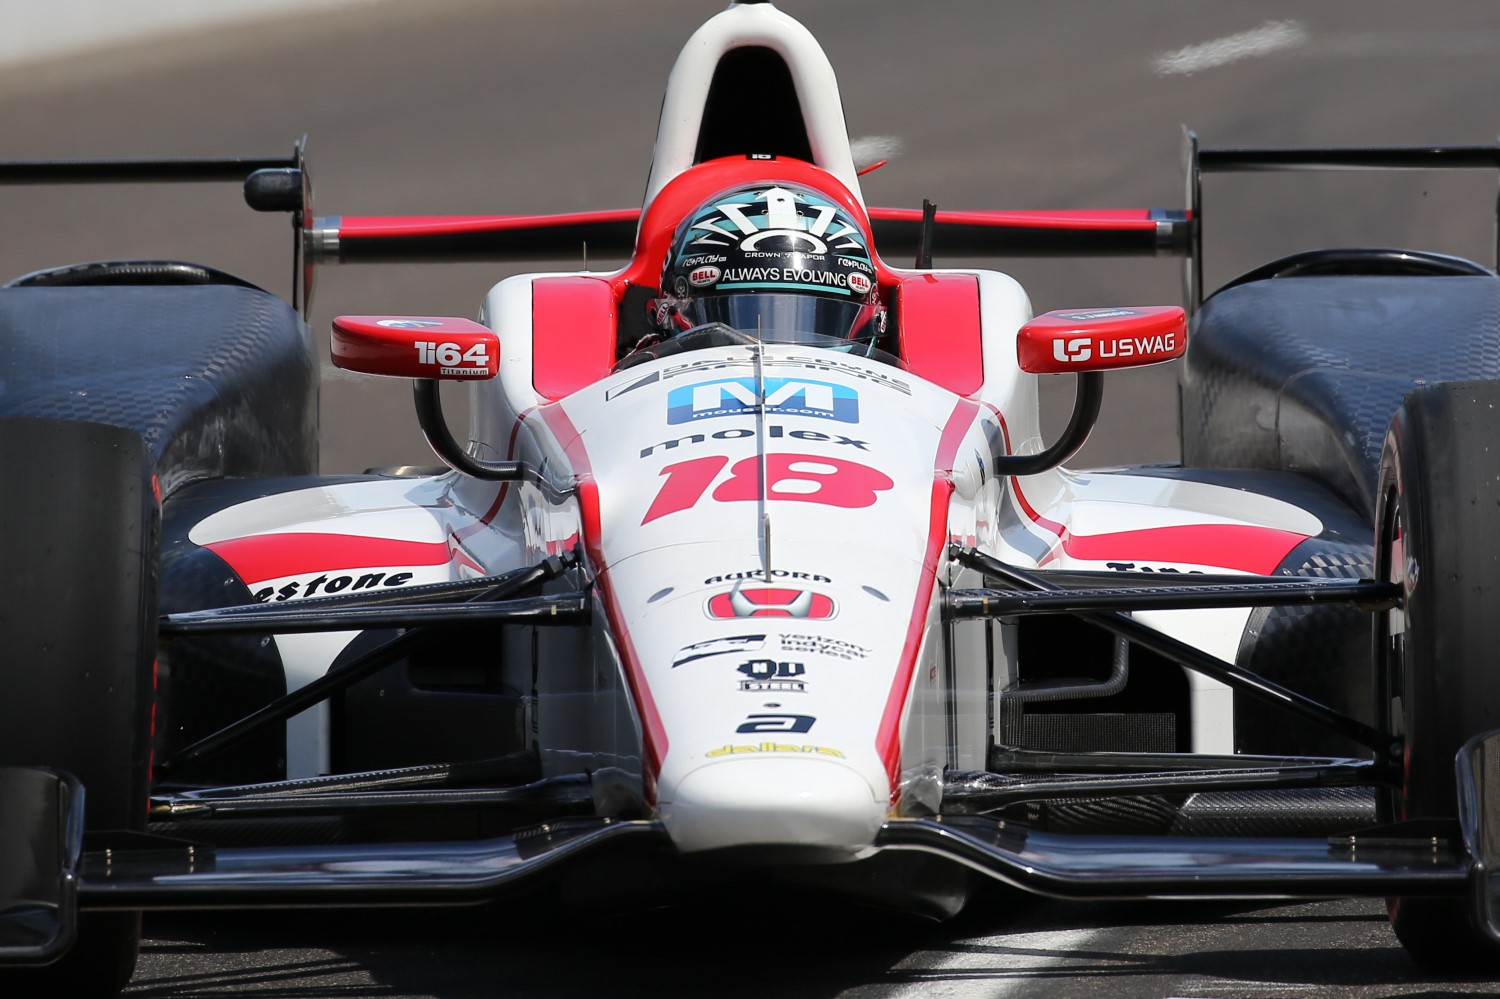 James Davison in the Dale Coyne Honda at Indy 500 this year.